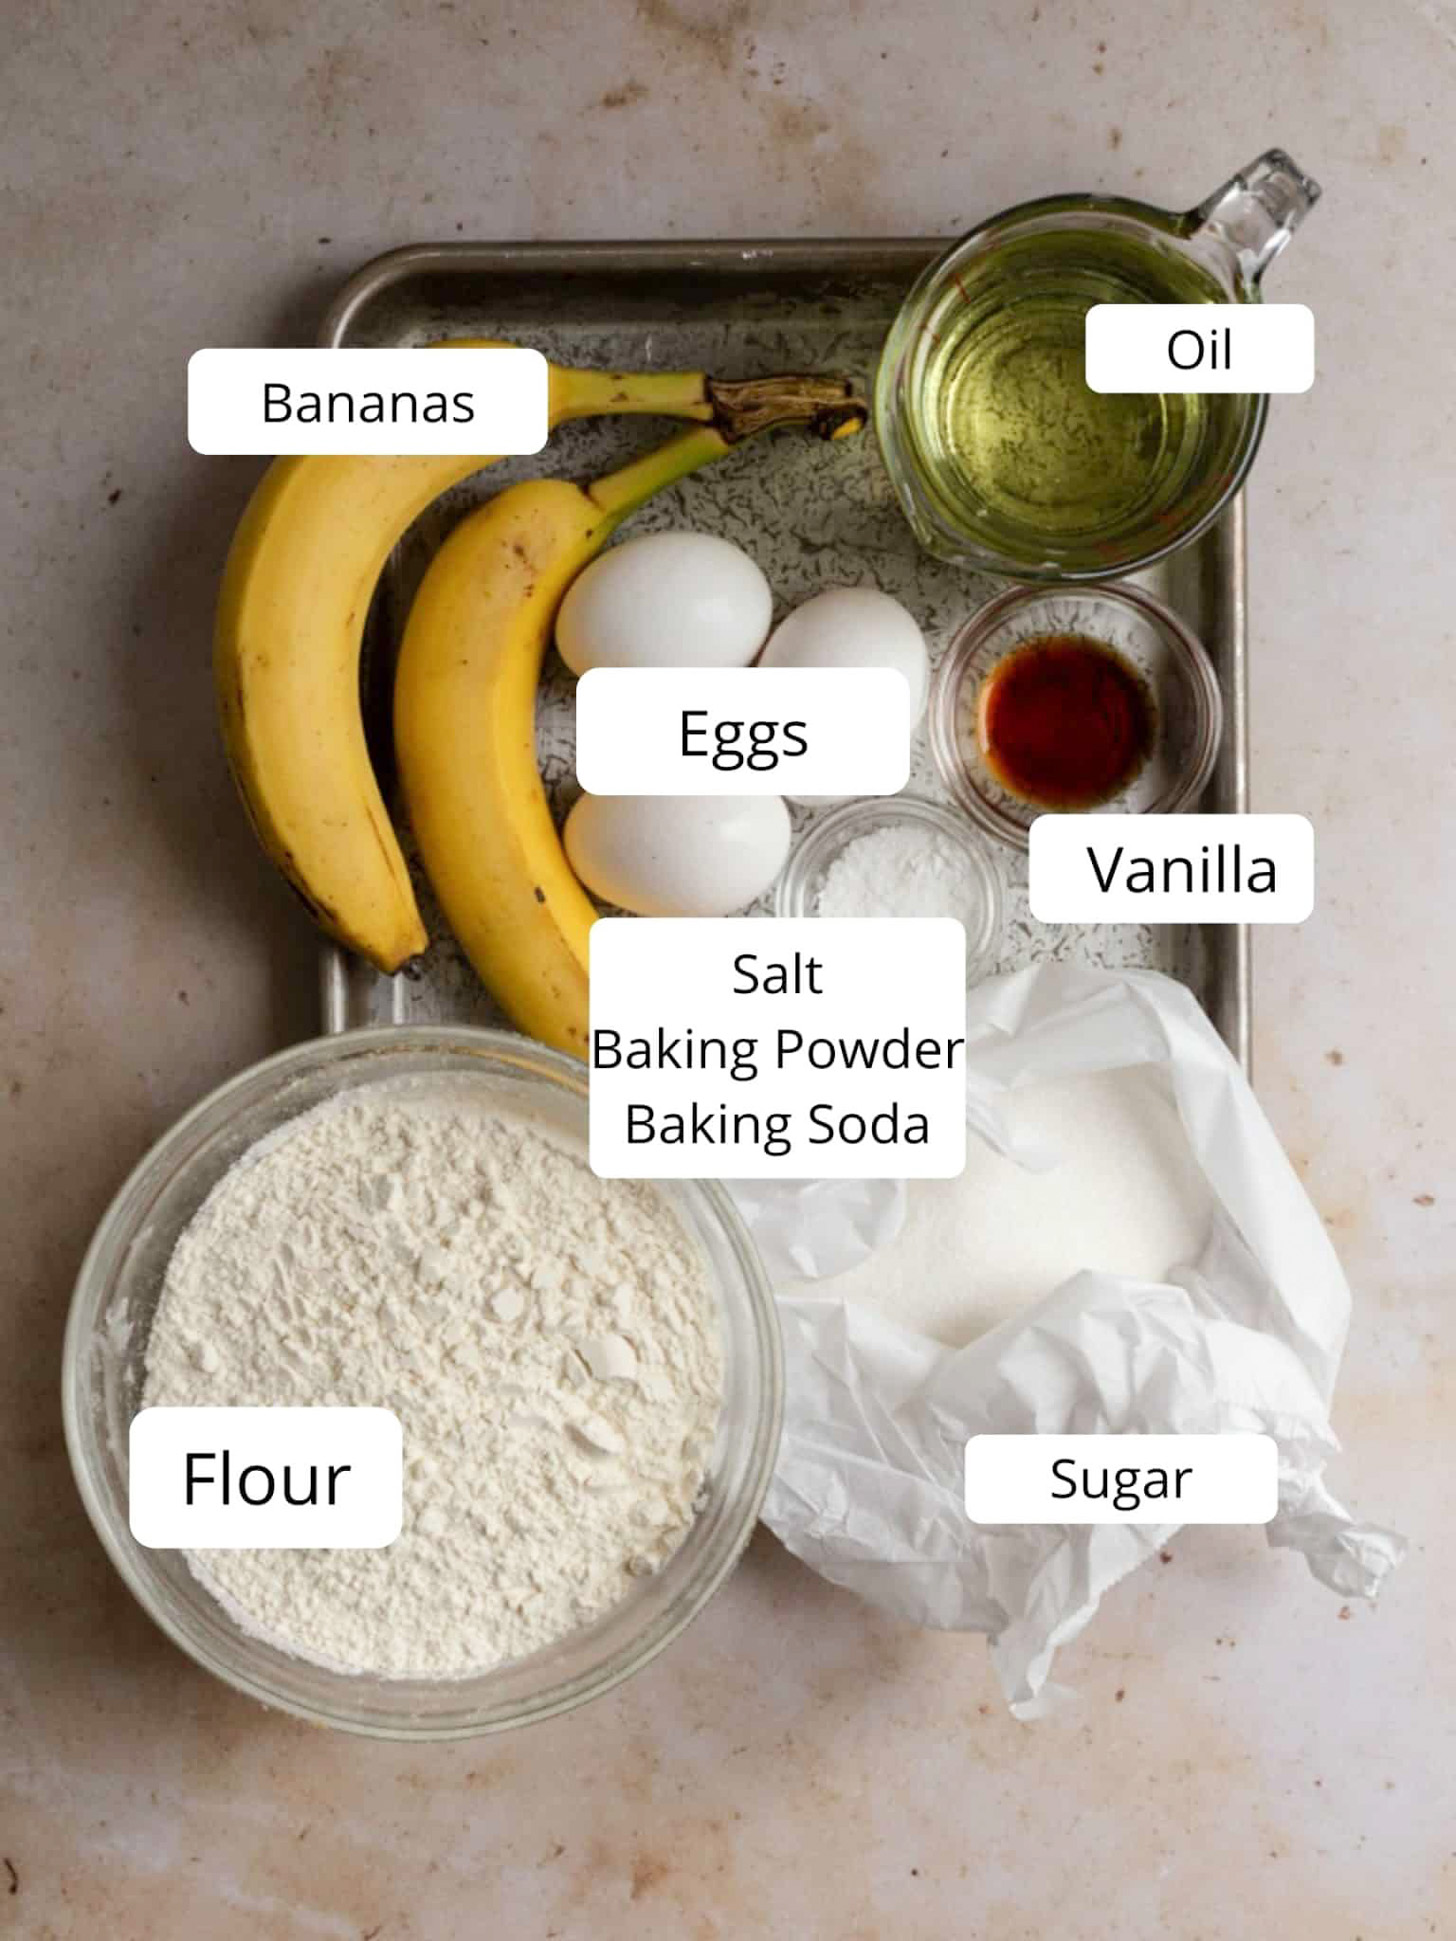 Ingredients for a banana bread with oil.